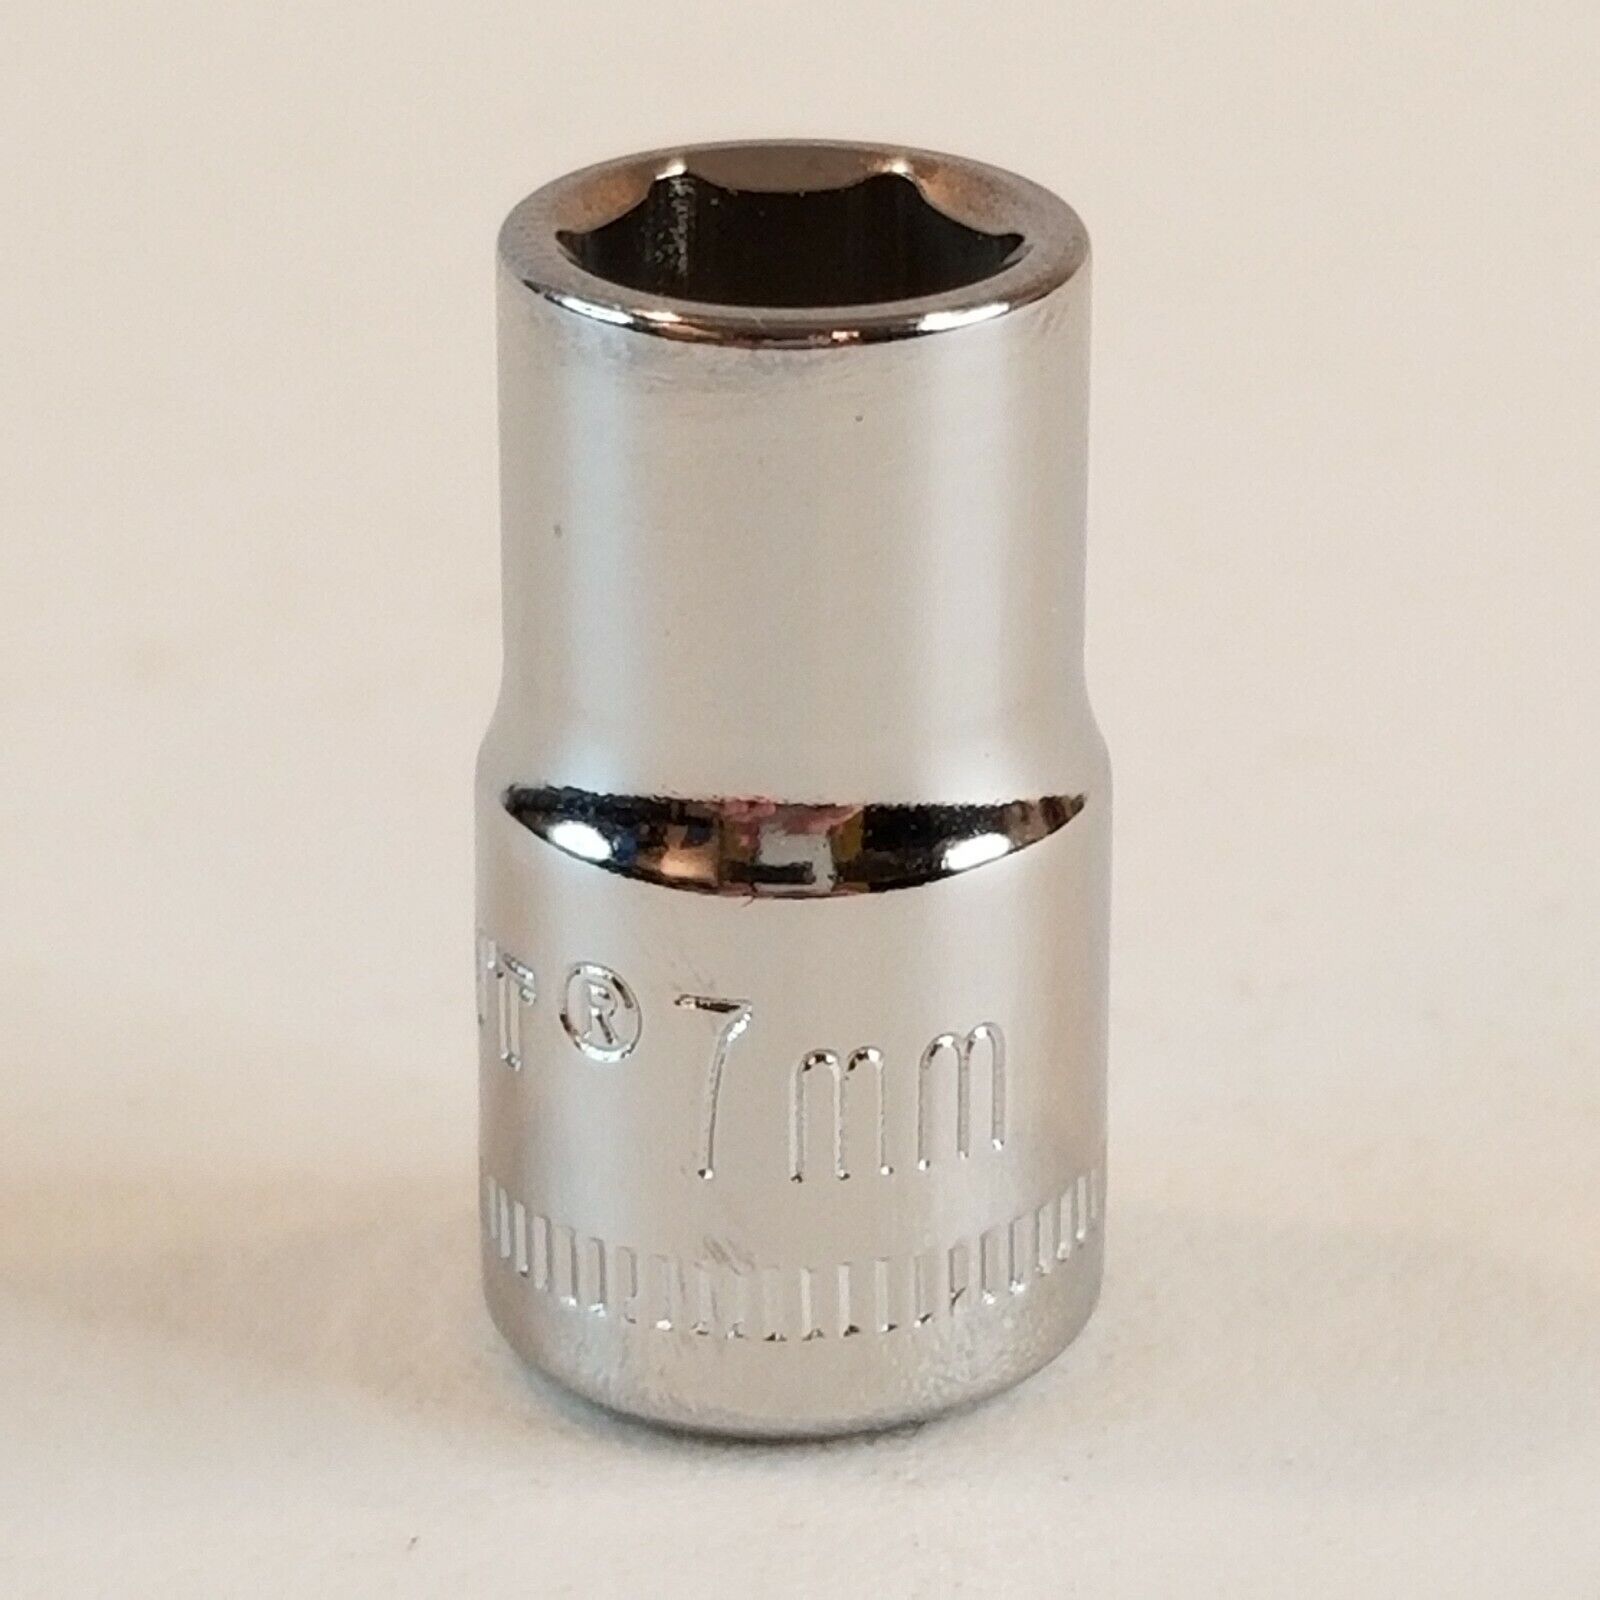 Crescent 7mm 6 Point 1/4" Drive Shallow Chrome Polished Socket 